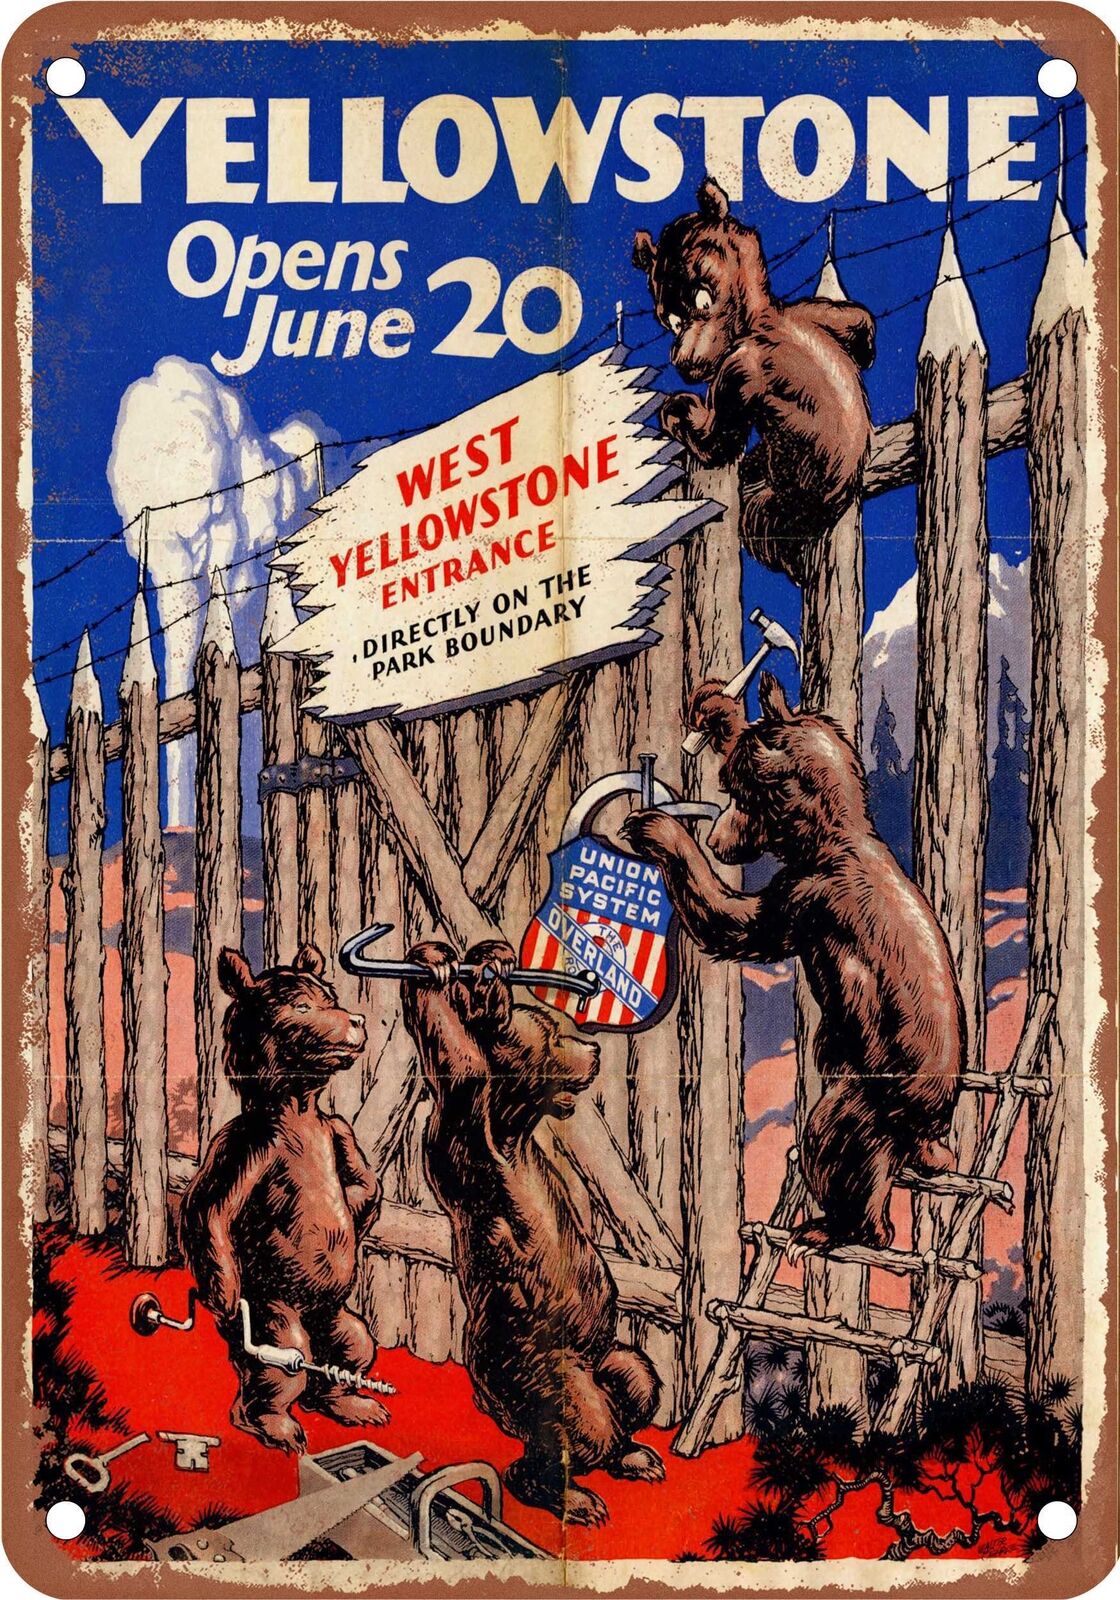 METAL SIGN - 1929 Union Pacific Yellowstone Bears - Vintage Rusty Look